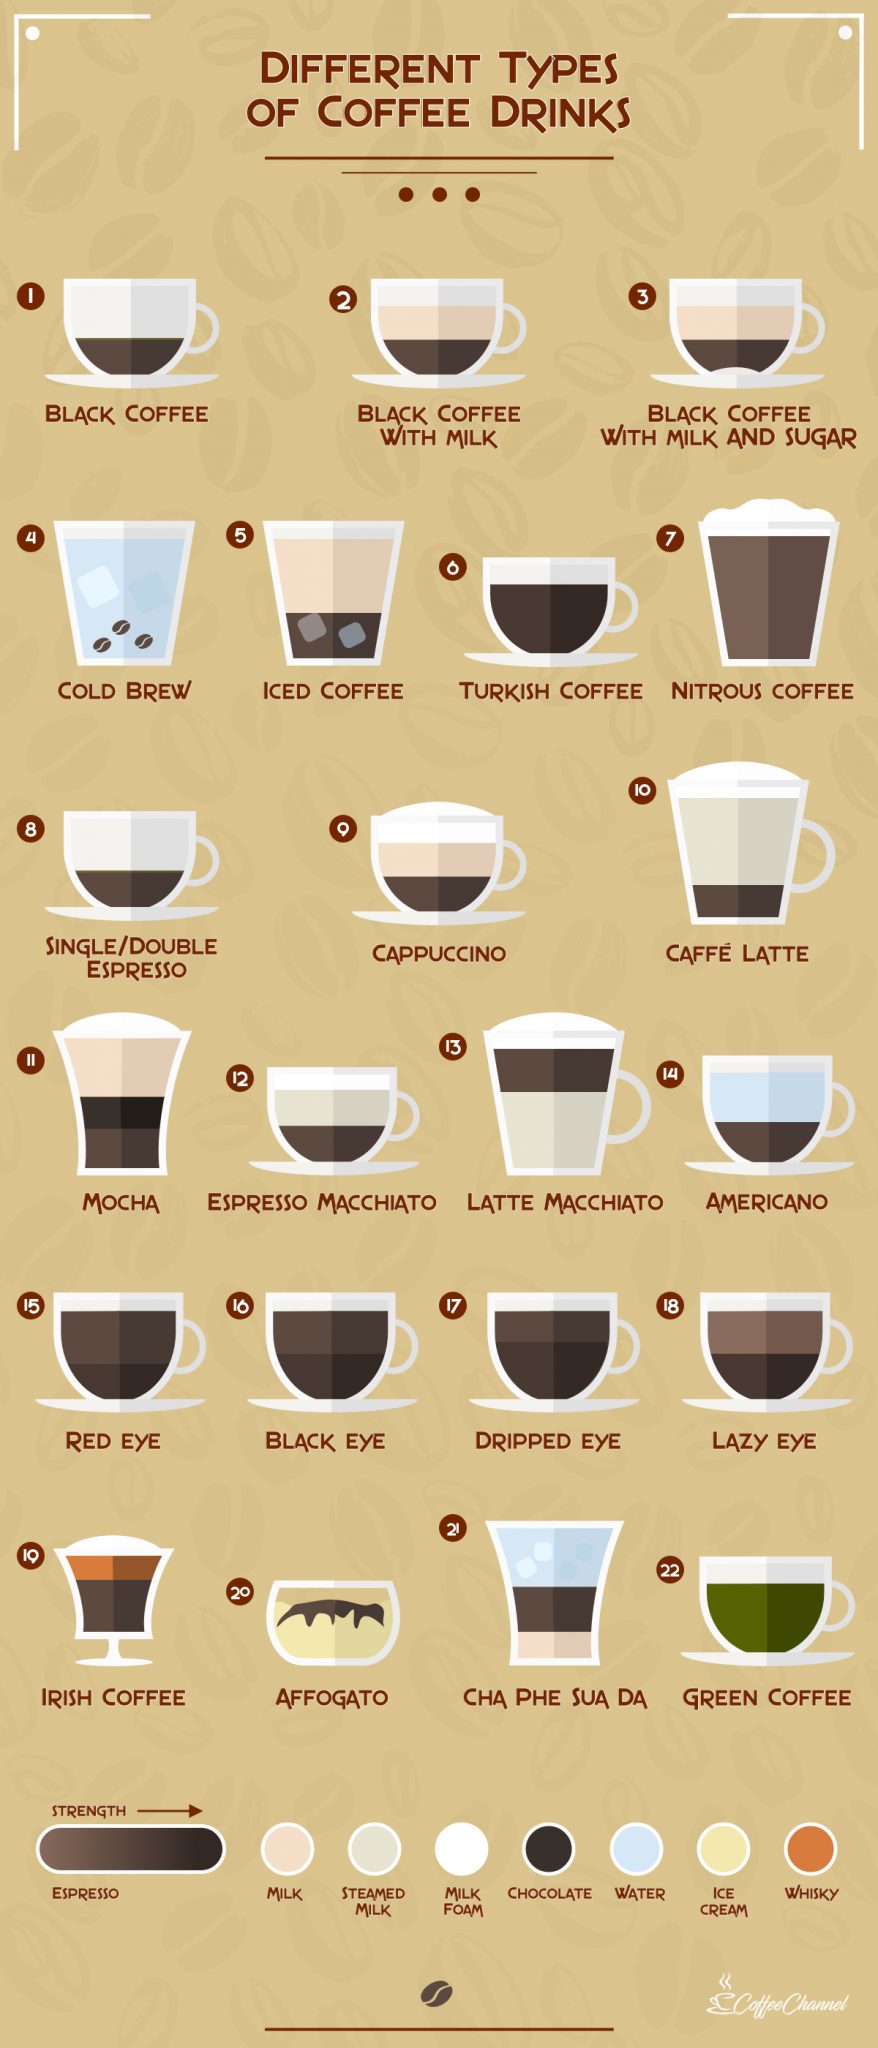 22-different-types-of-coffee-drinks-explained-with-pictures-coffee-affection